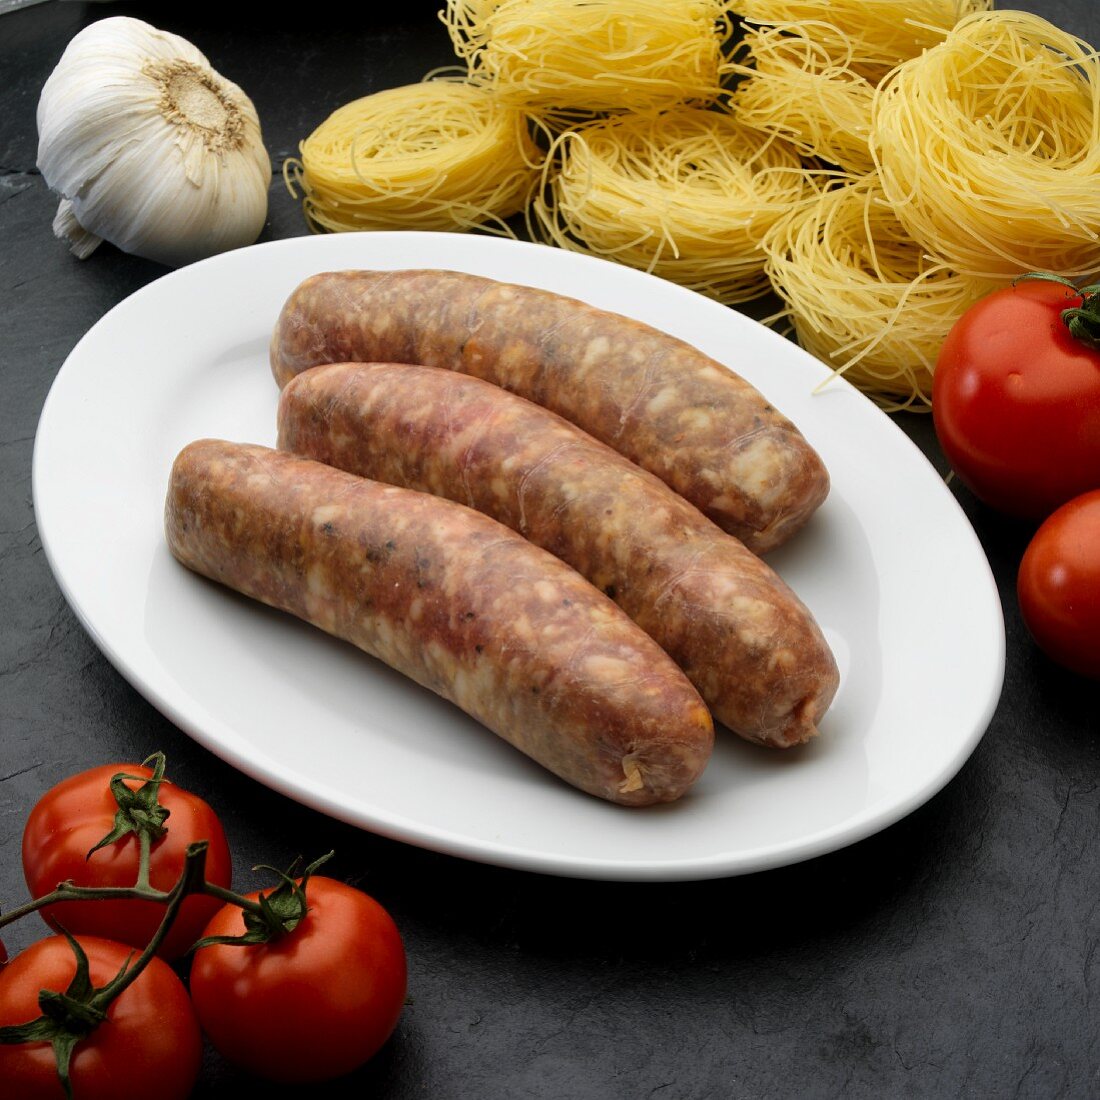 Three fresh Italian sausages (salsiccia) on a plate surrounded by ingredients